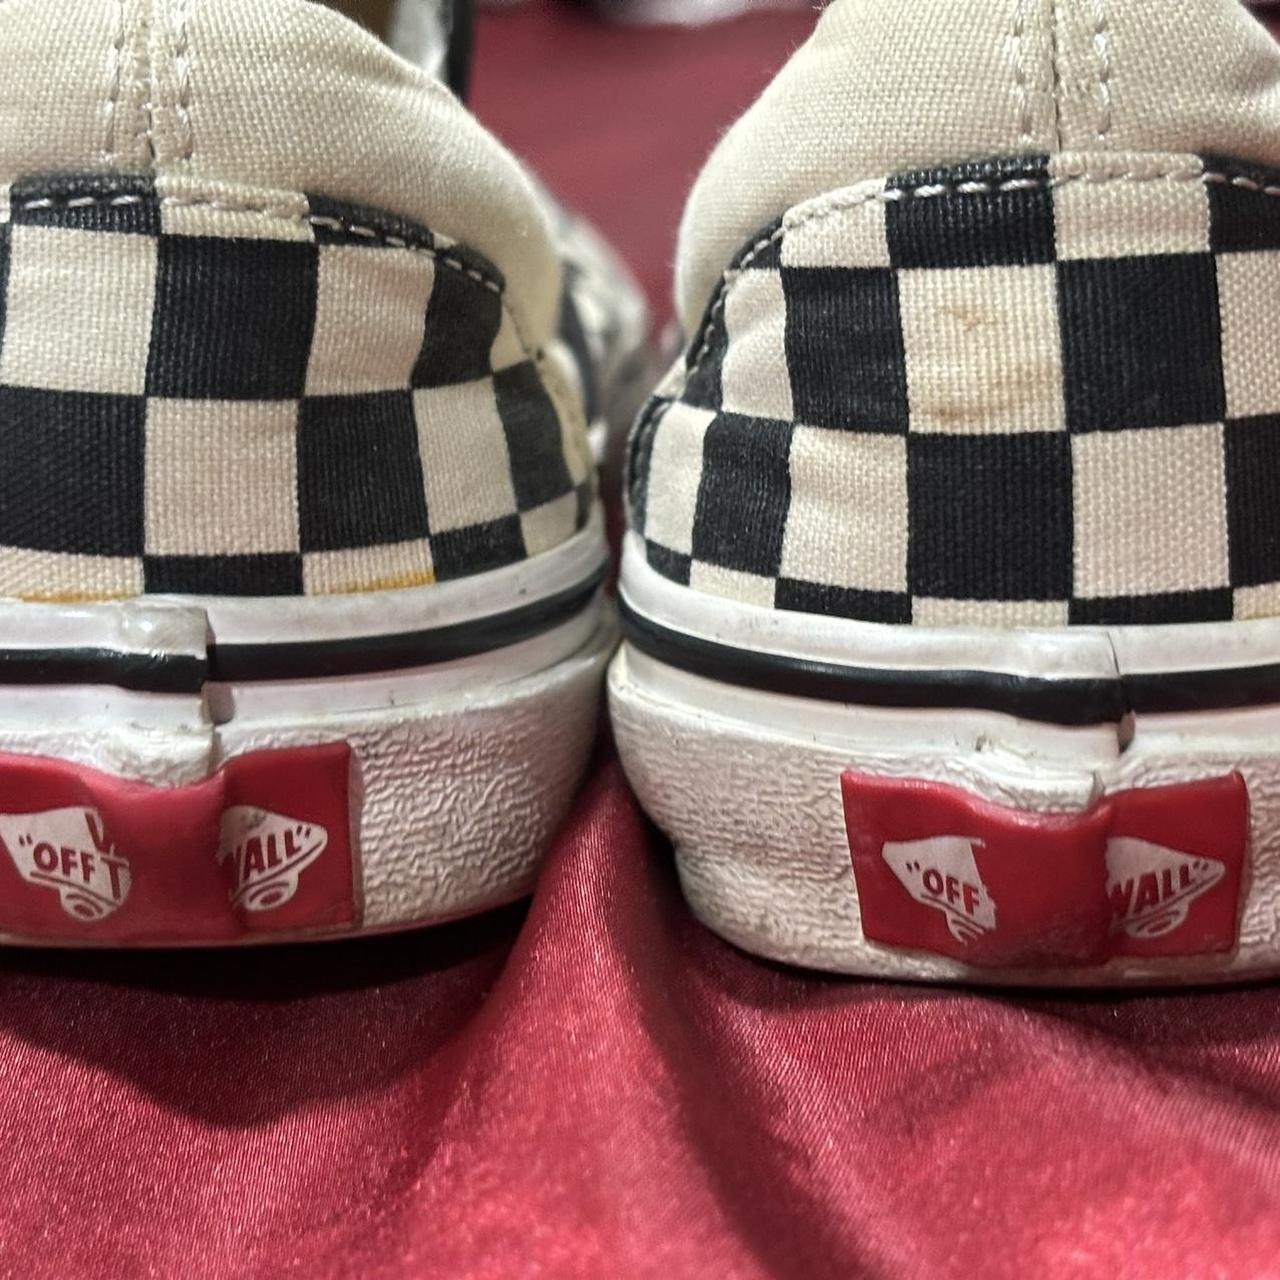 Vans Women's Black and White Trainers (4)